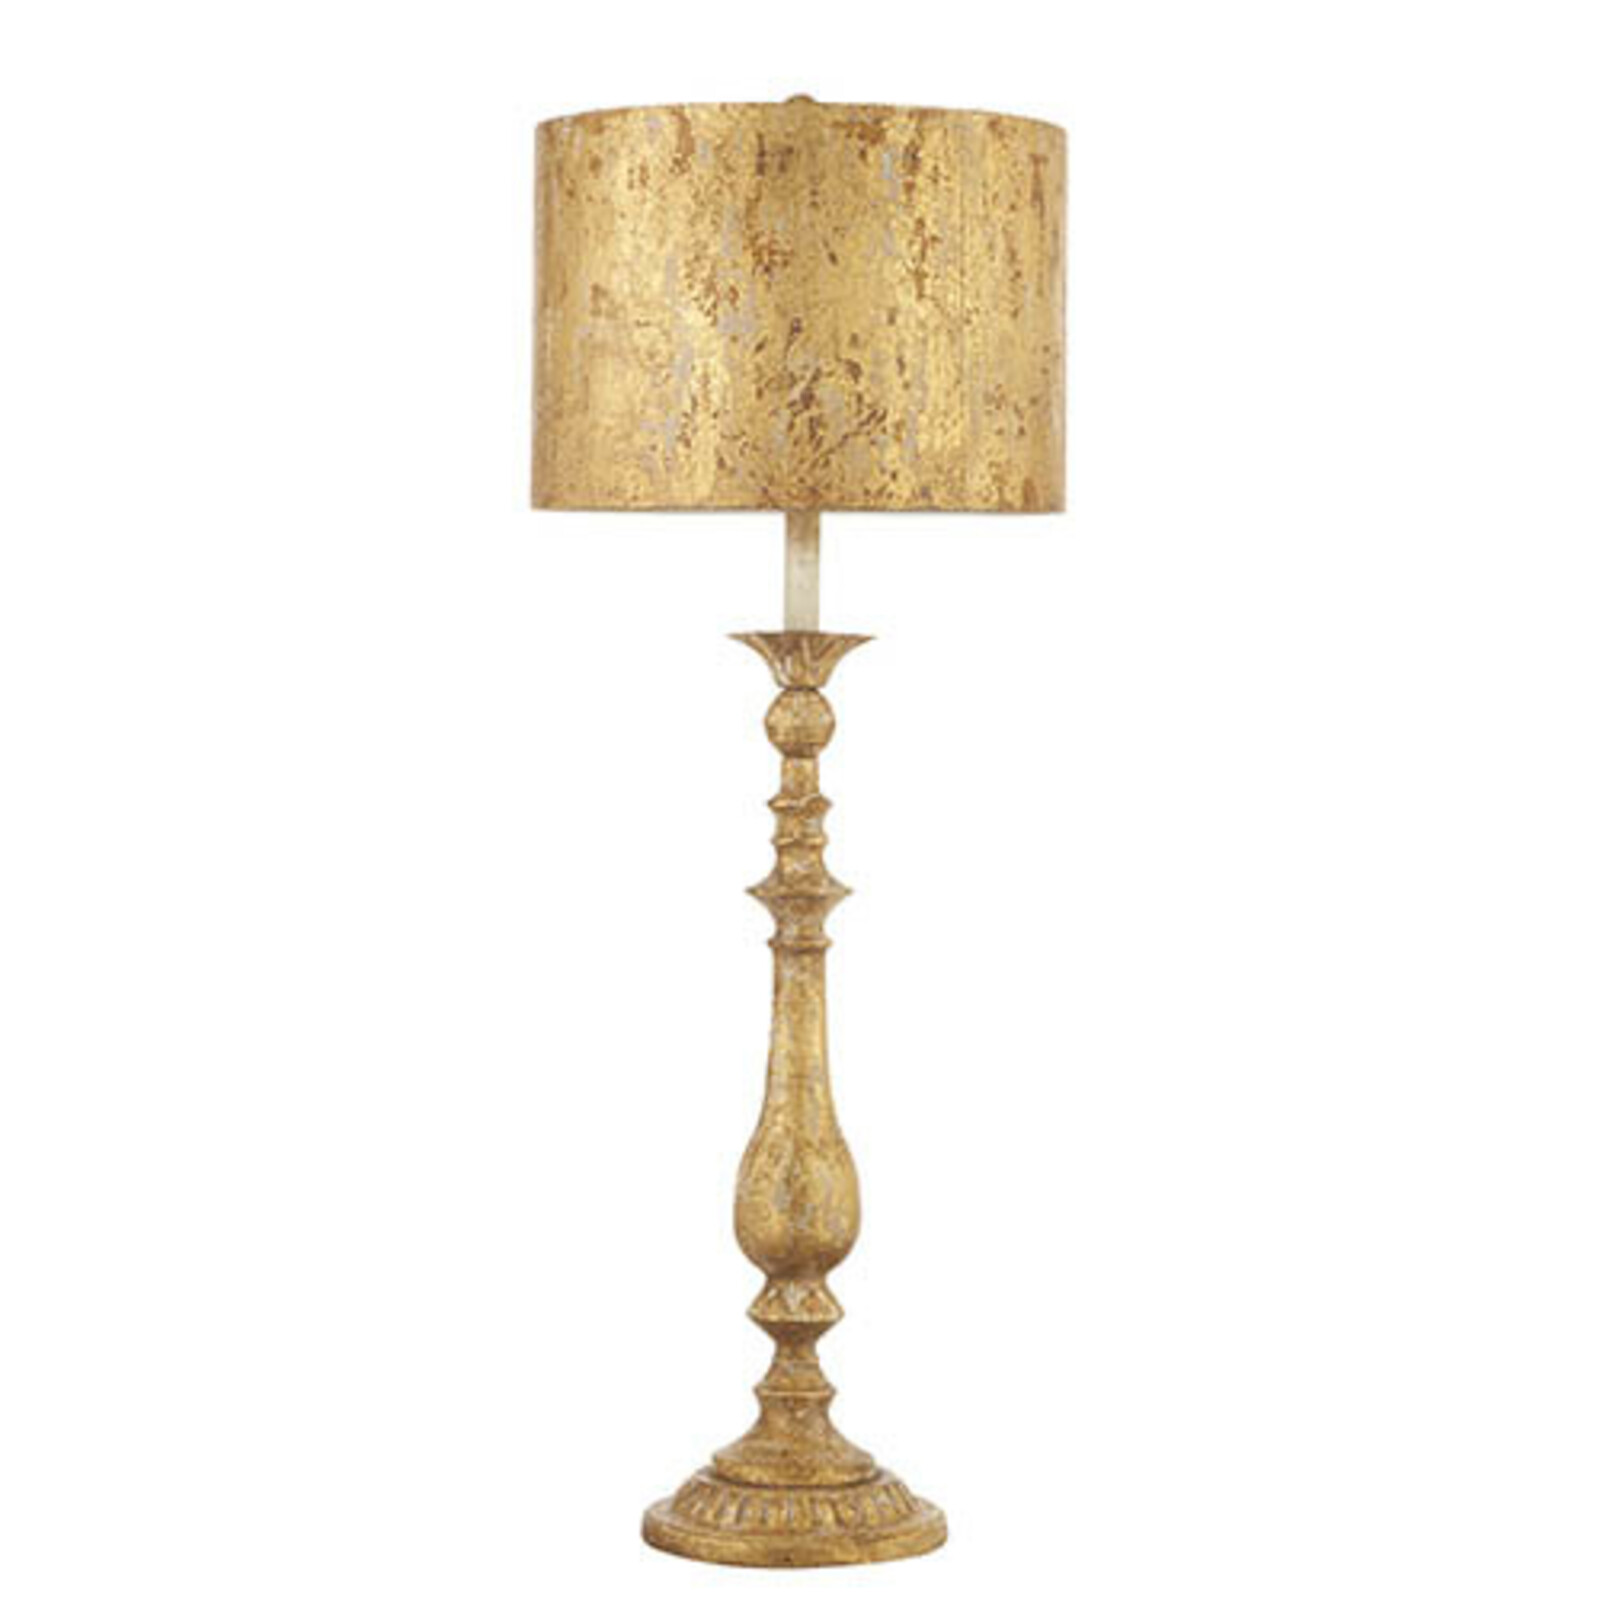 RAZ Imports Inc. 38" DISTRESSED GOLD LAMP WITH METAL SHADE  4232240 loading=